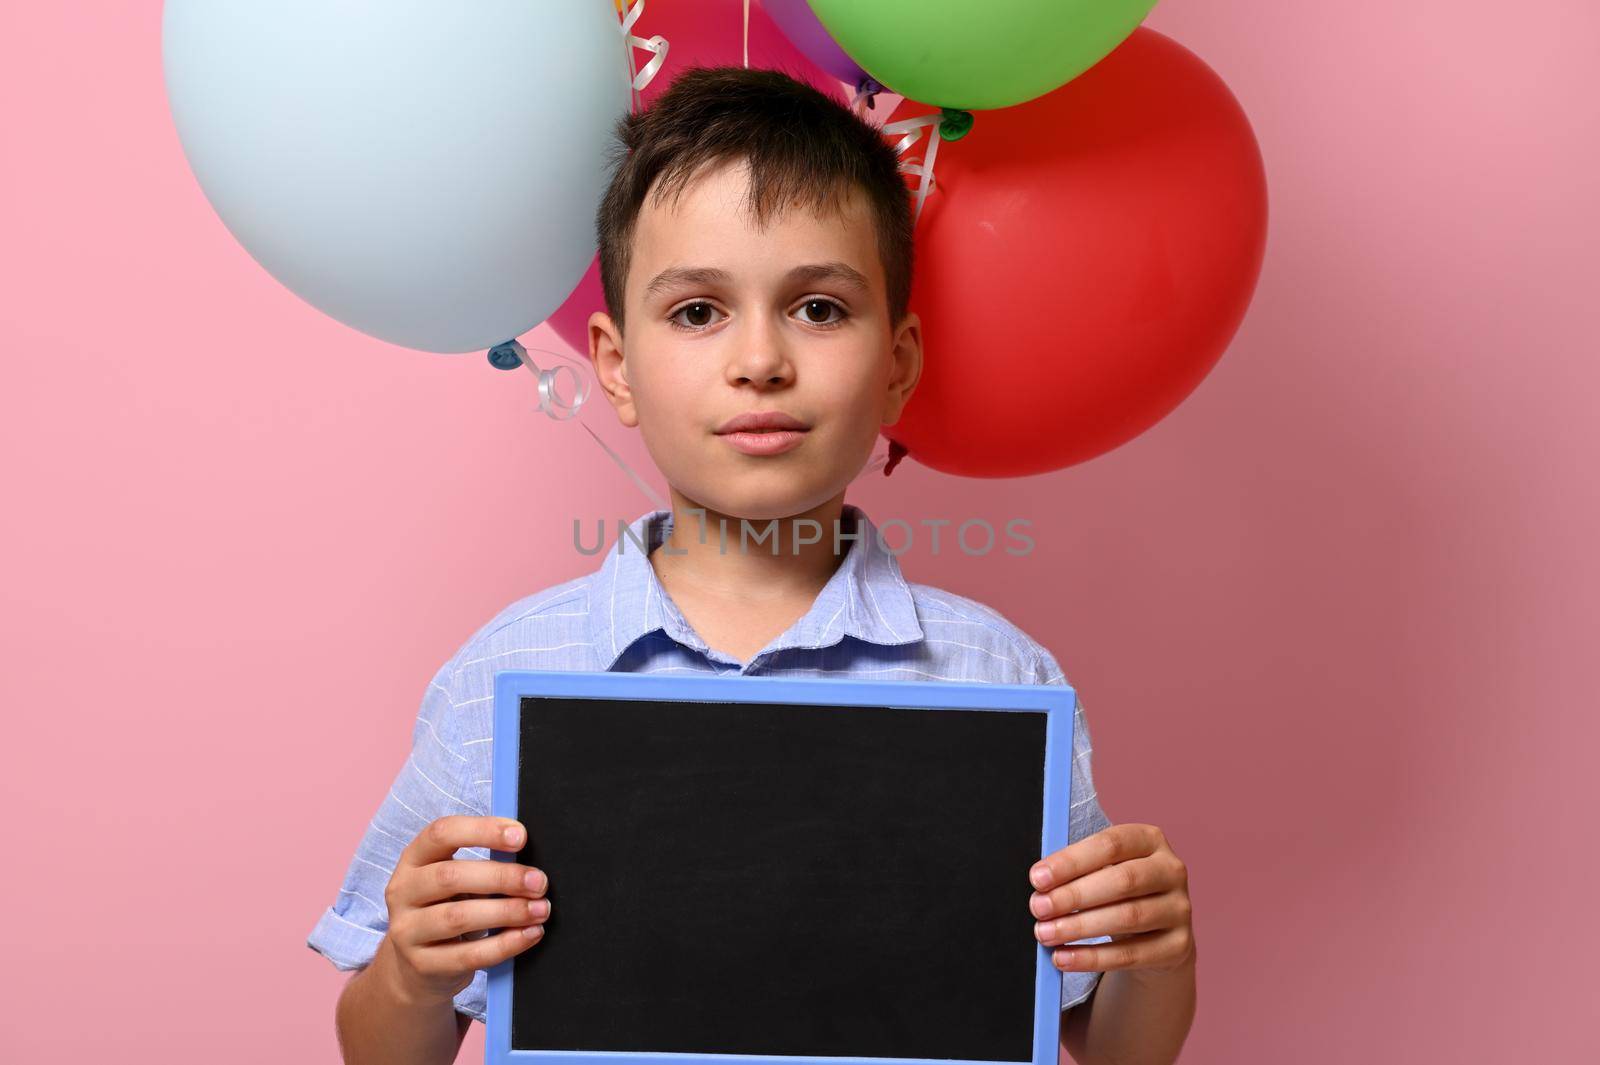 Handsome boy with blank chalkboard in his hand standing against multicolored baloons on pink background with copy space by artgf